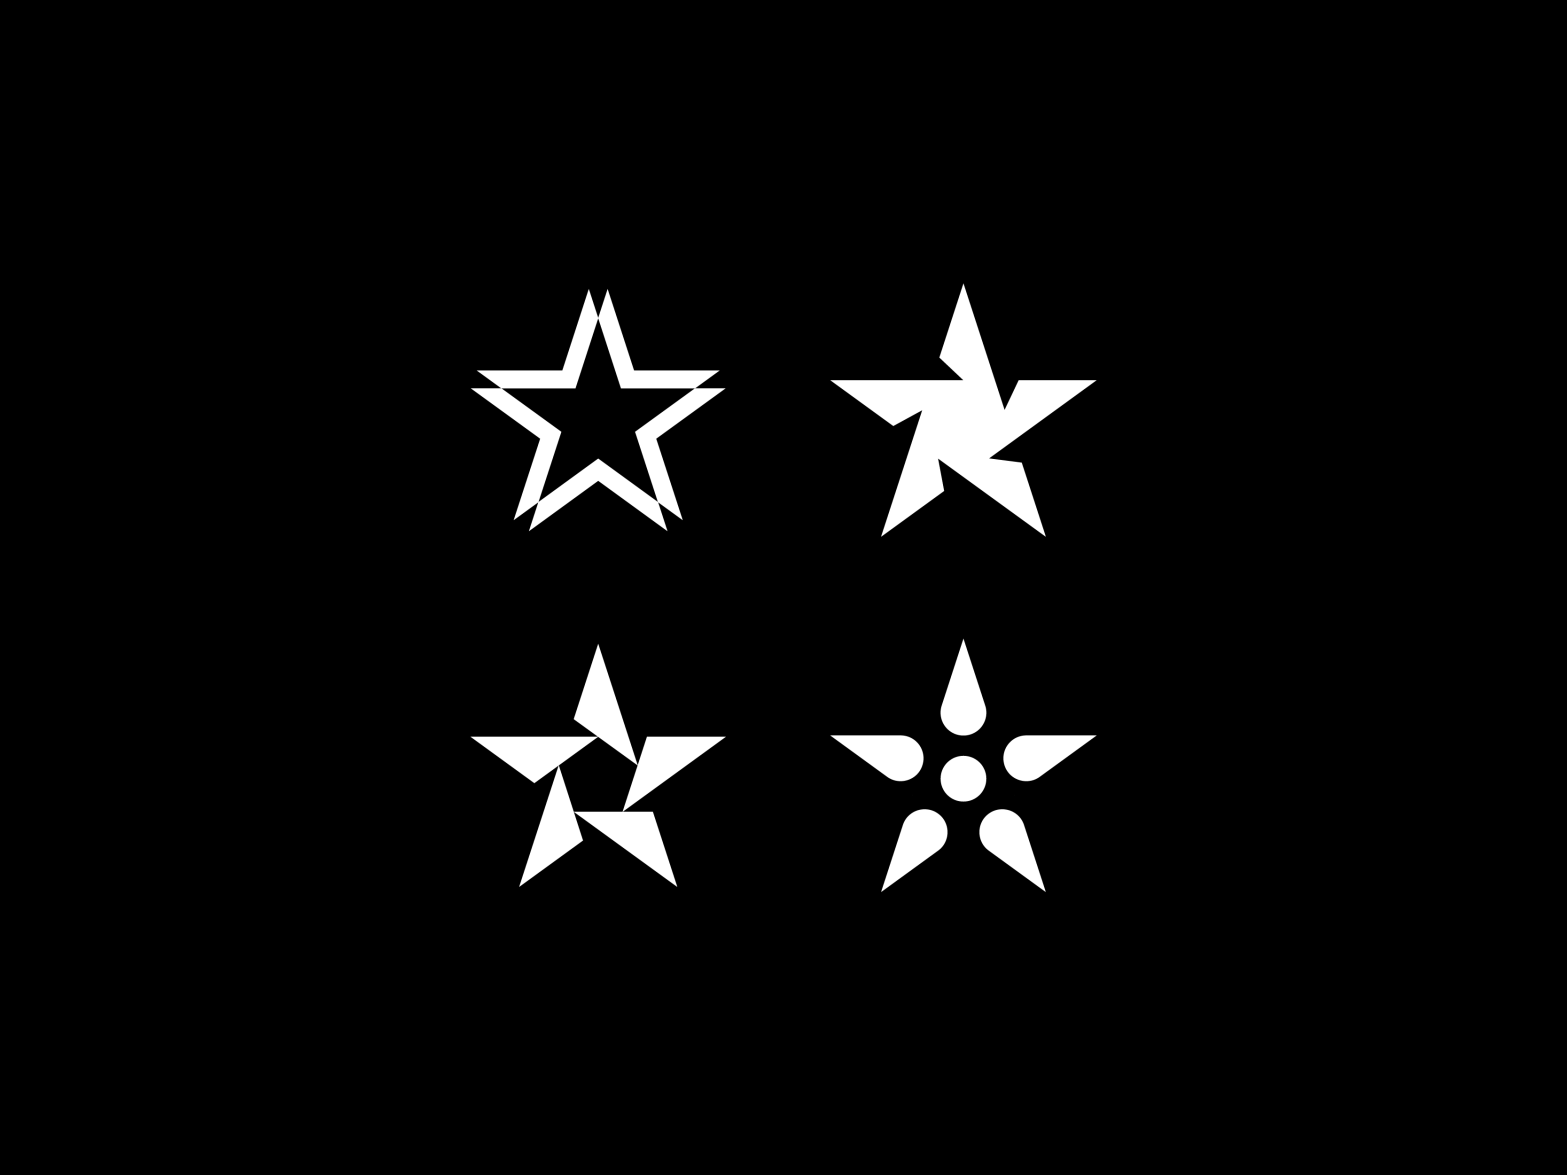 Star Logo Collection by Dylan Menke on Dribbble